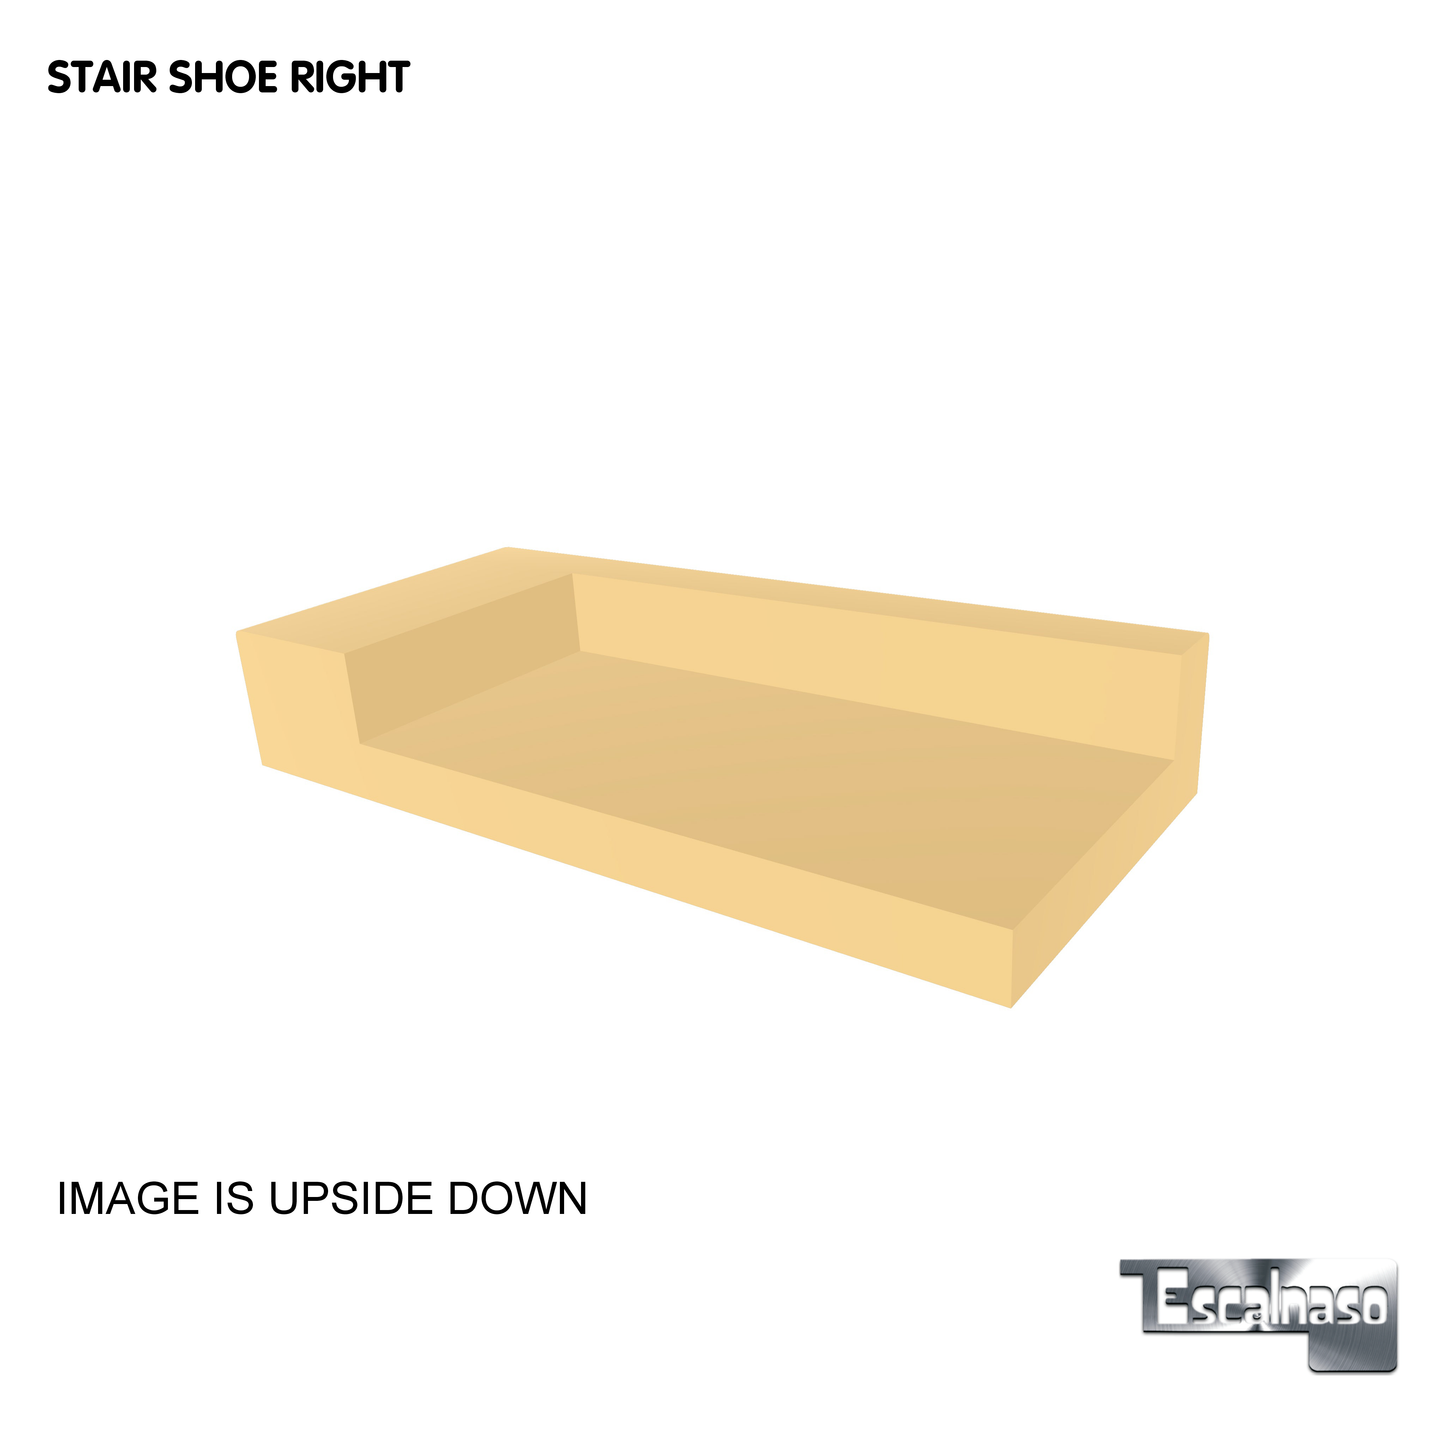 (18110) LARGE STAIR SHOE LEFT